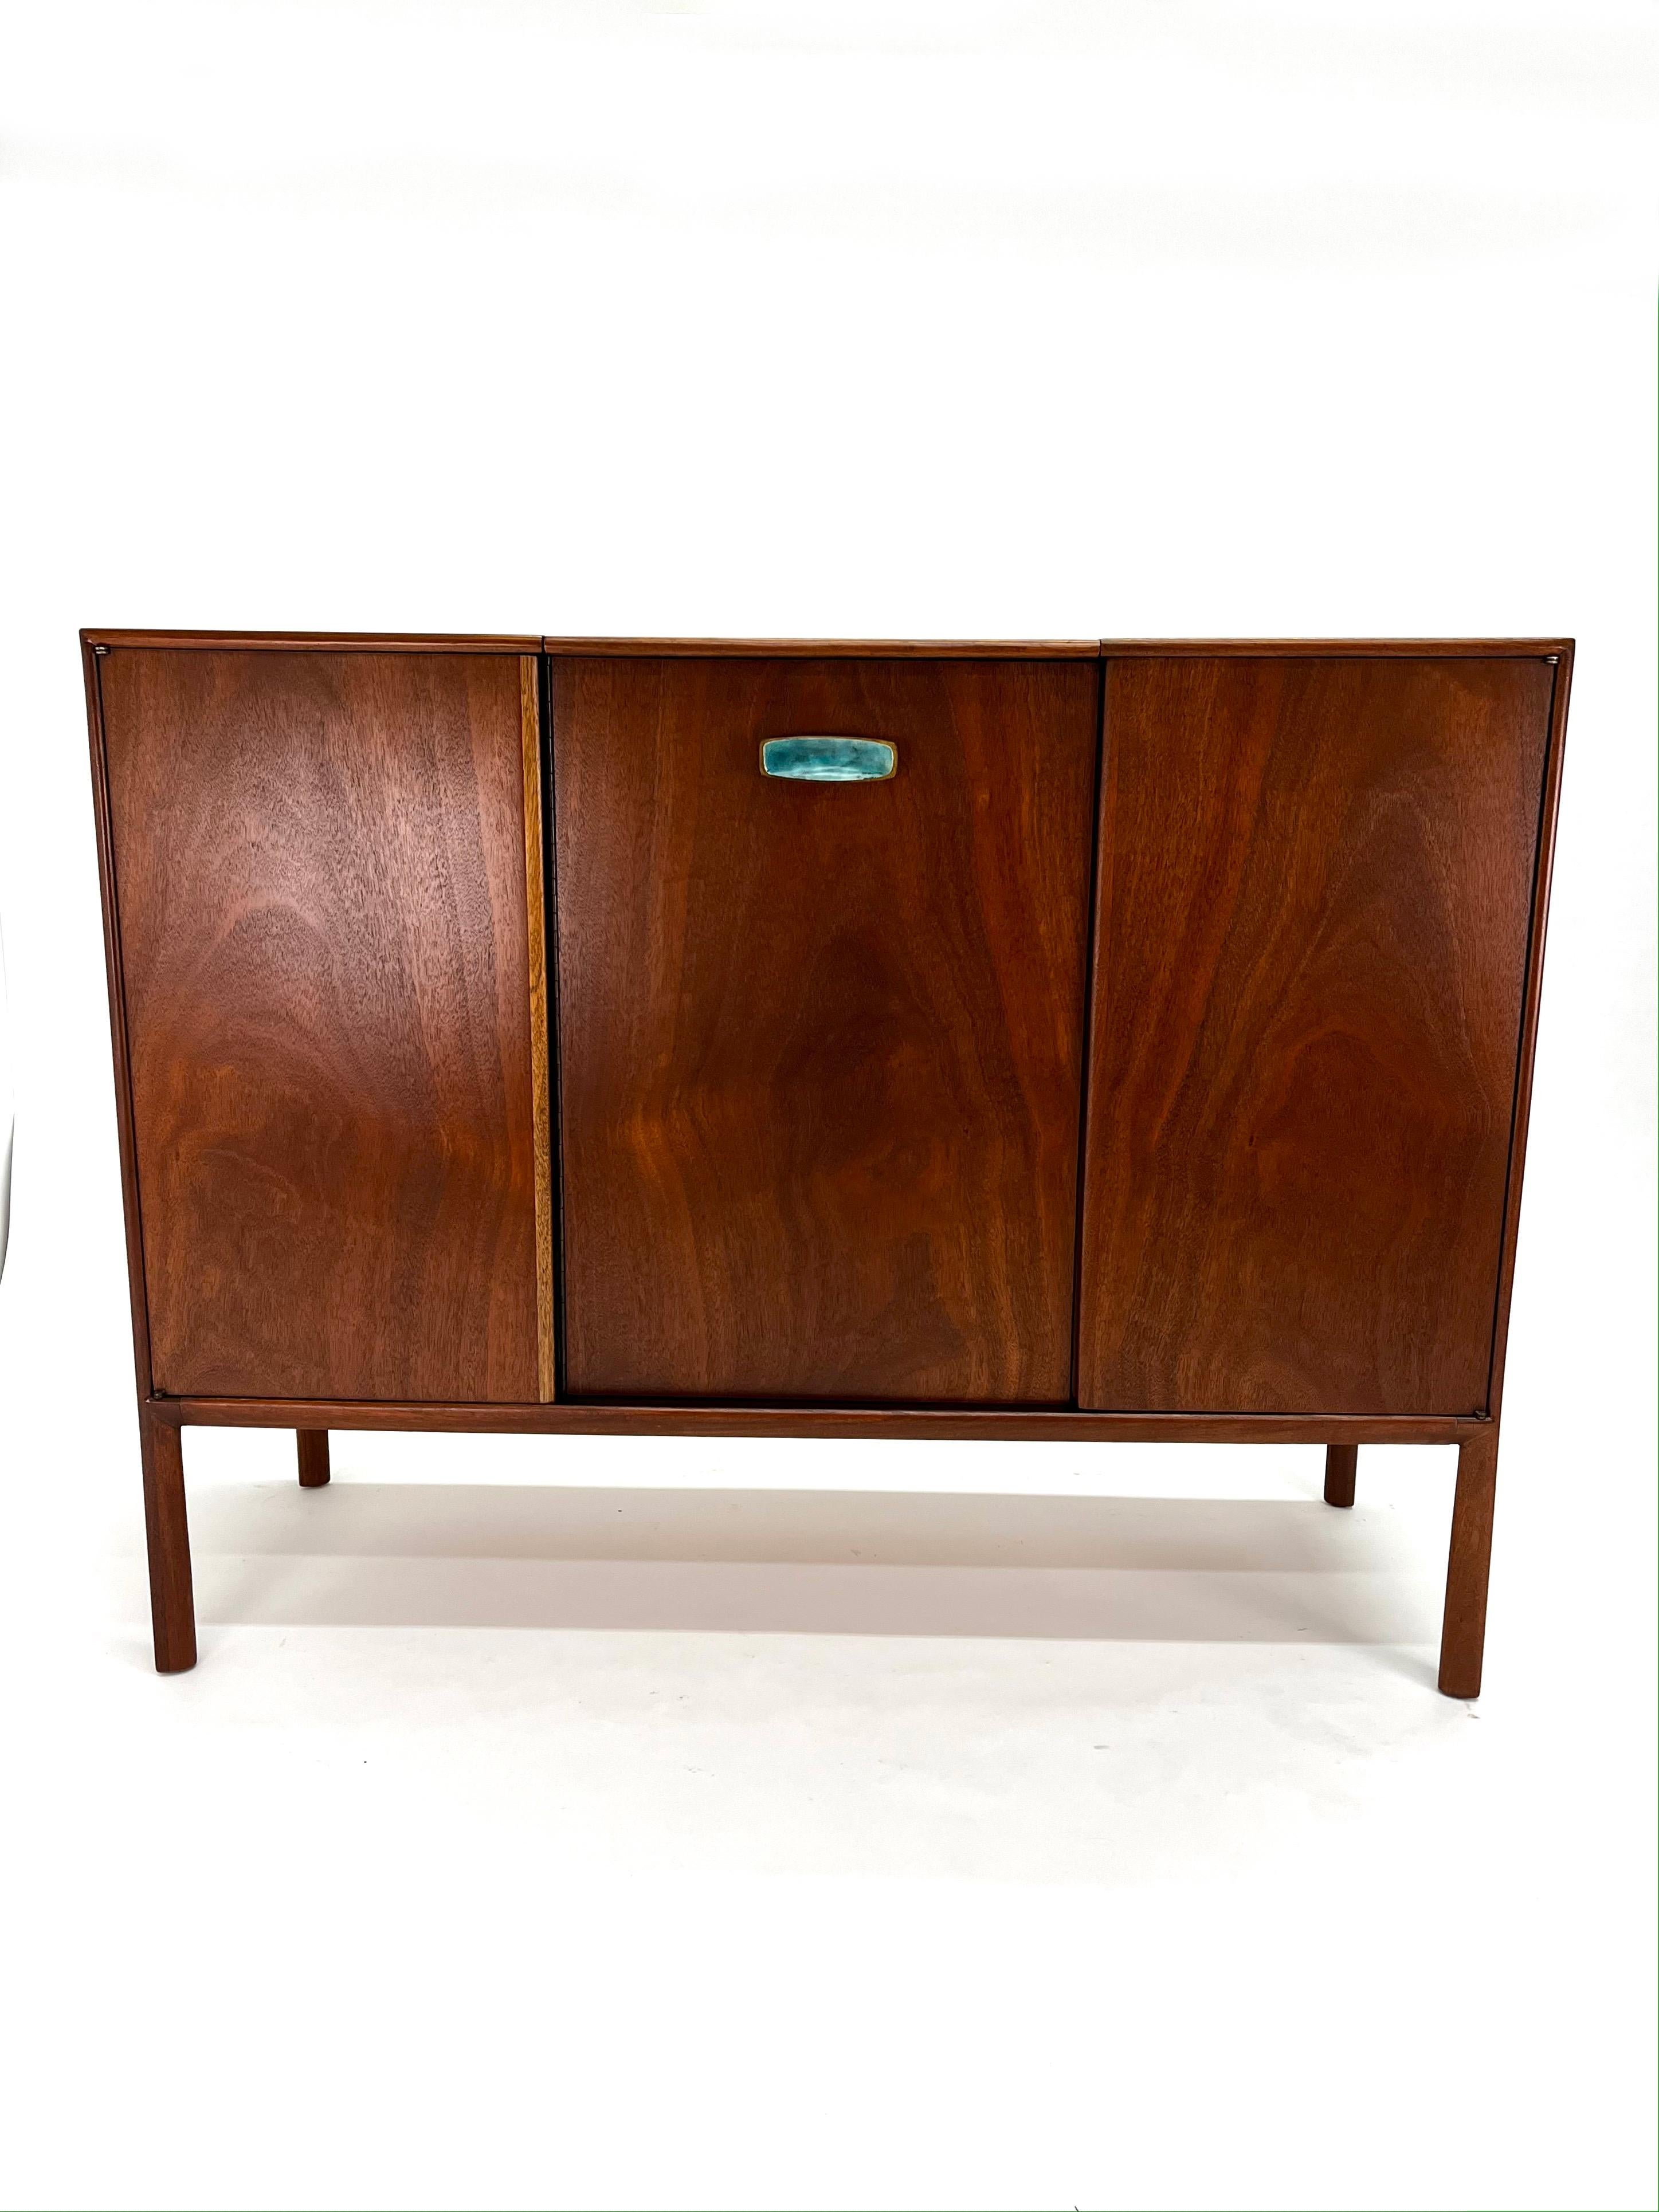 Ray Sabota For Mt. Airy Gentleman's Cabinet with vanity. Made of Mahogany wood and solid mahogany drawer fronts. Beautiful turquoise pull revels drawers. The dresser features three sleek door fronts which open to reveal interior storage. Center flip